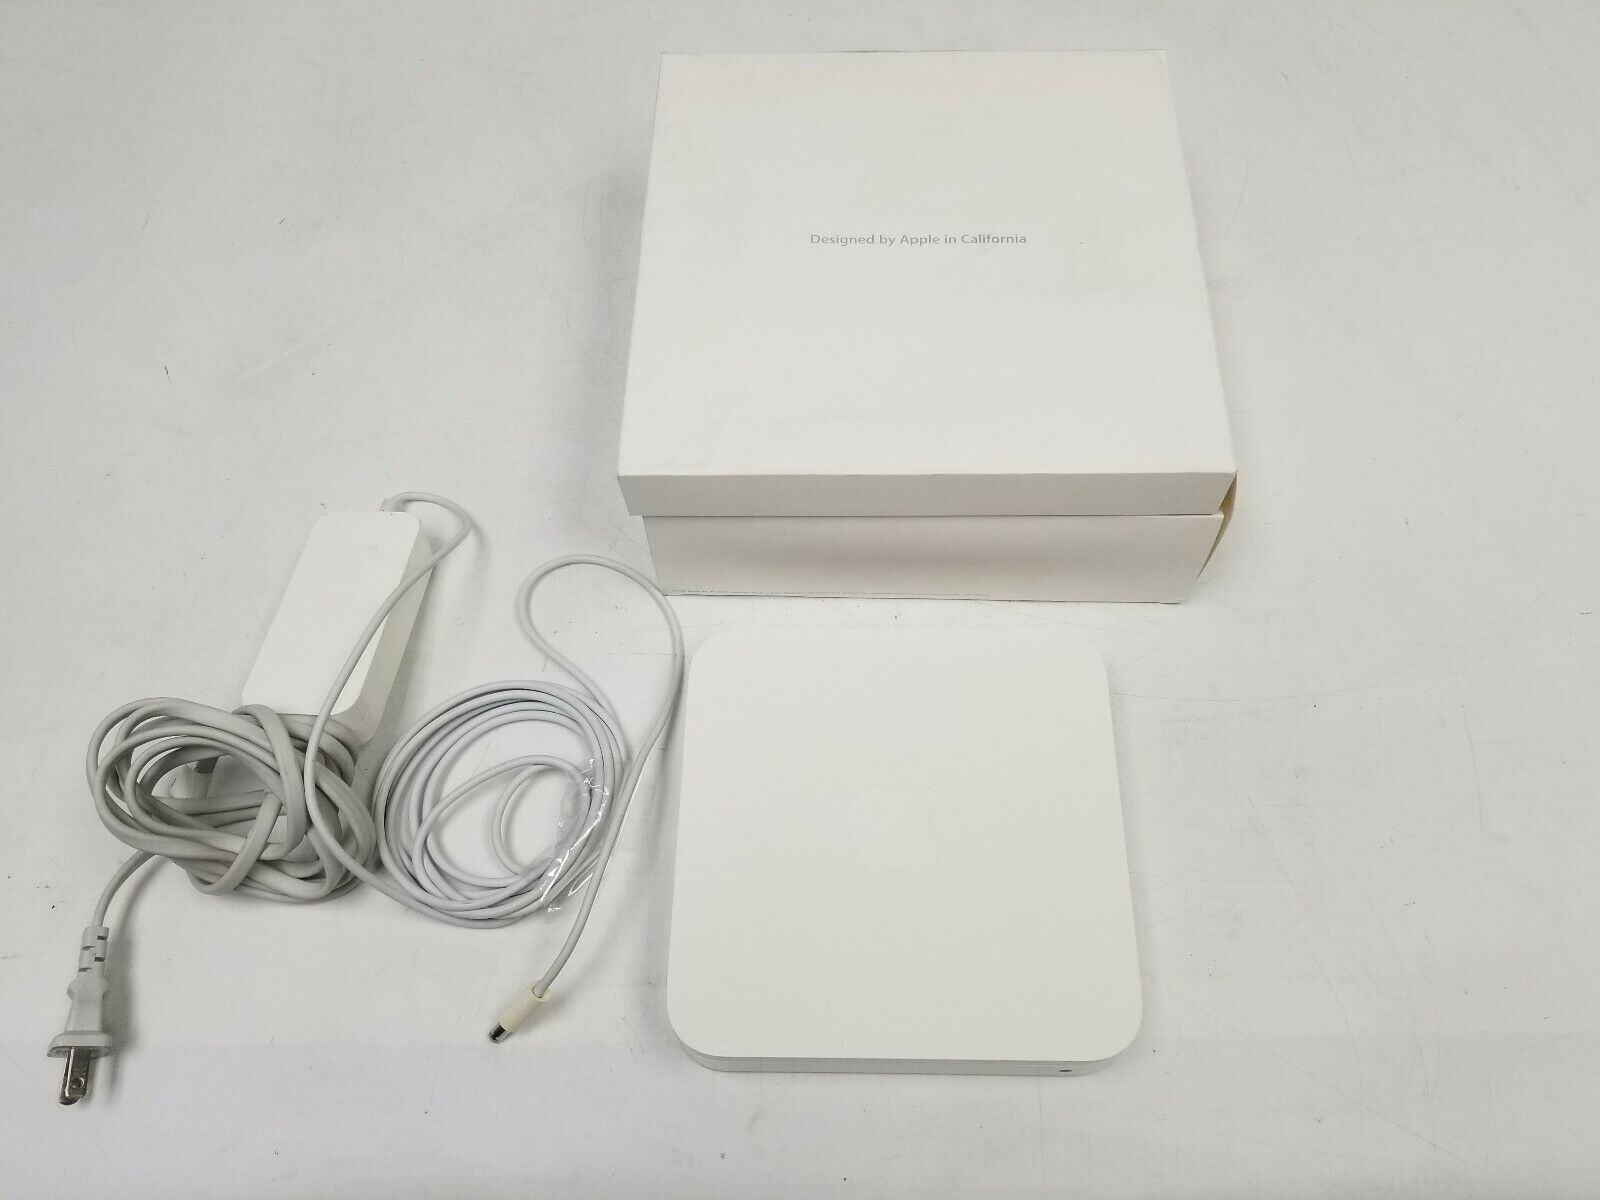 Apple A1354 AirPort Extreme Base Station Router w/ Power Adapter